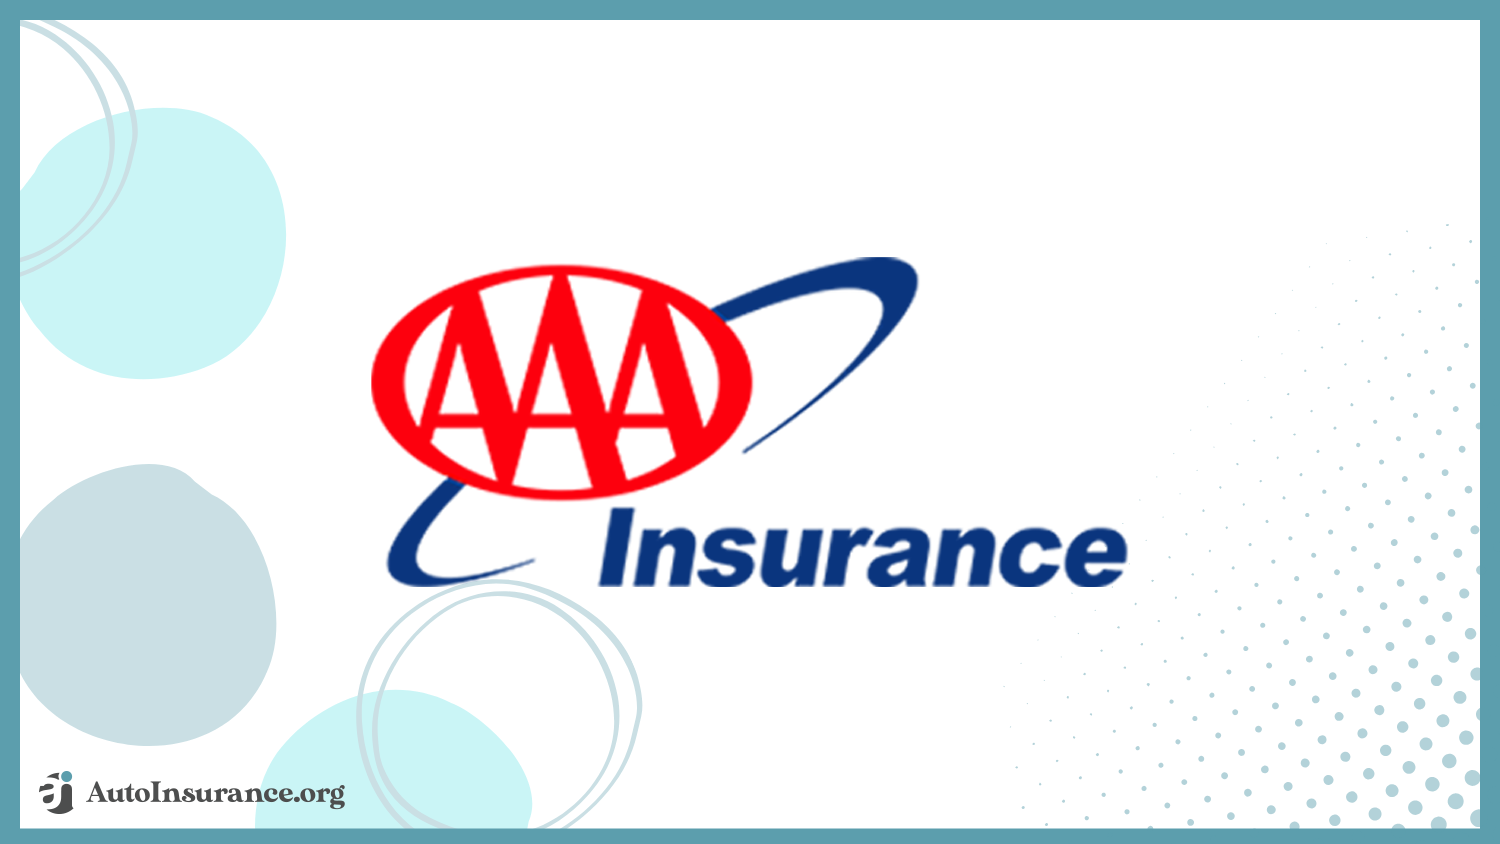 AAA: Best Auto Insurance for Disabled Veterans